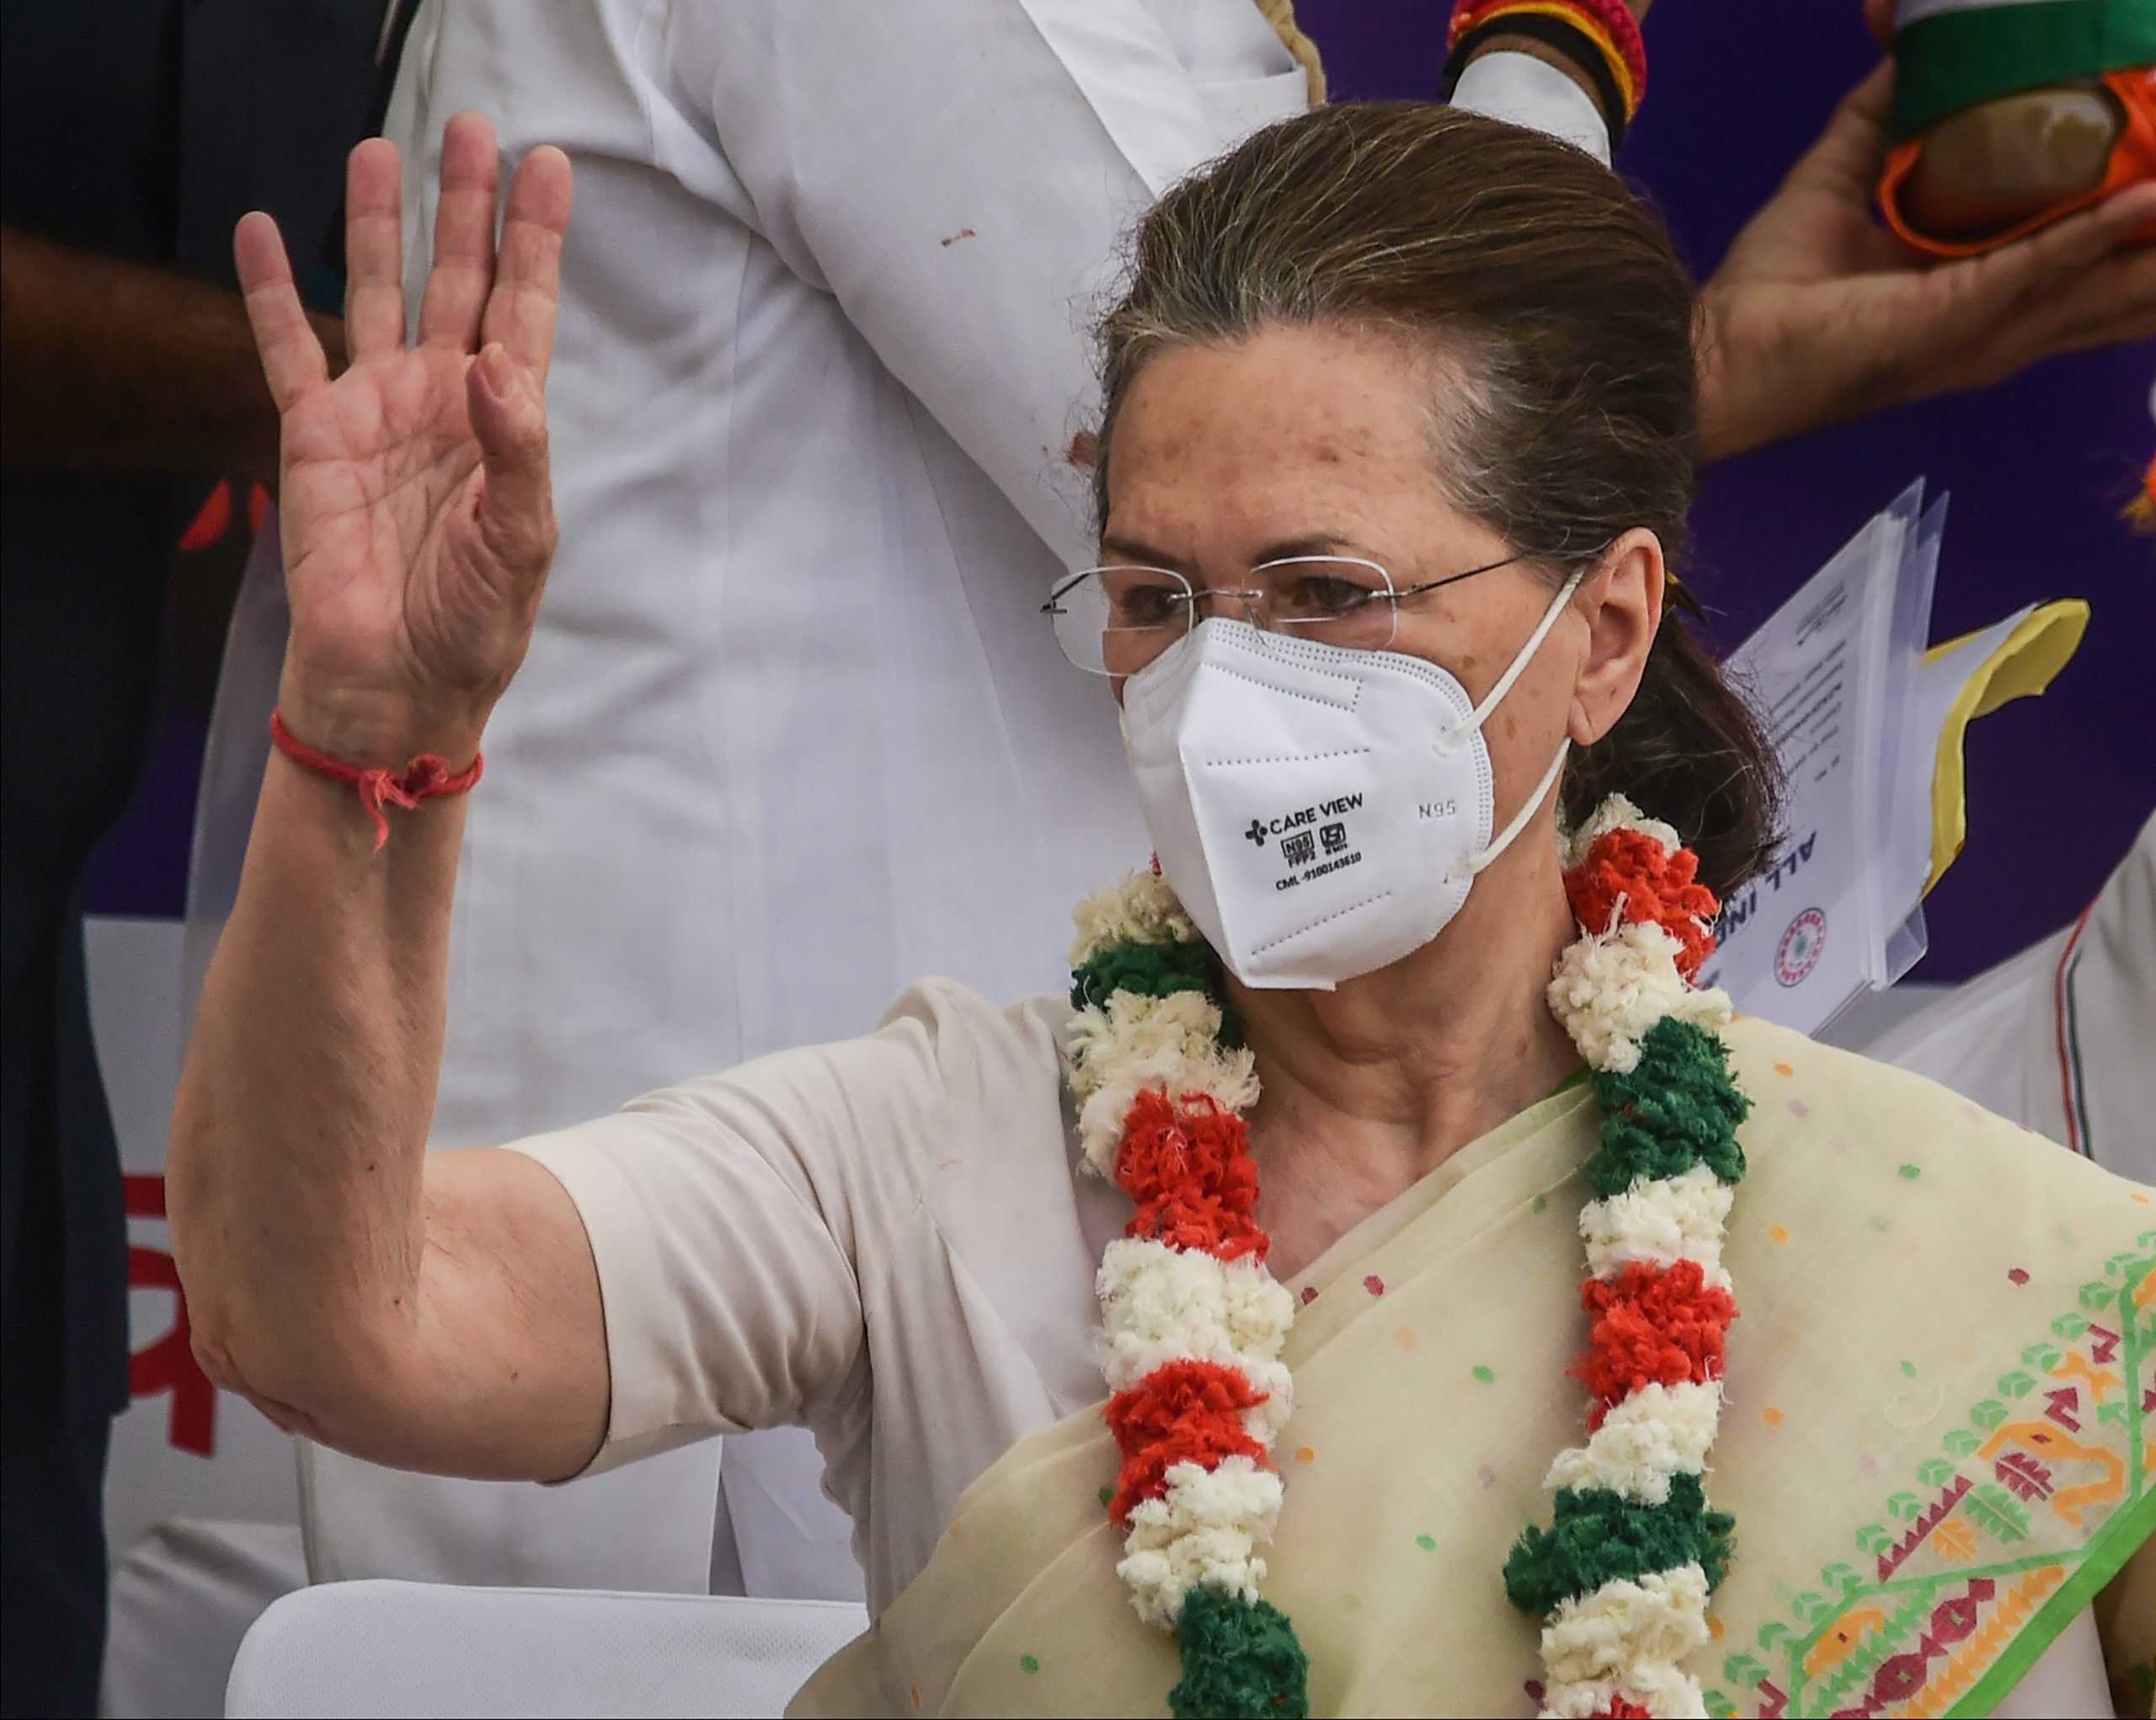 Congress president Sonia Gandhi tests positive for Covid-19, isolates self